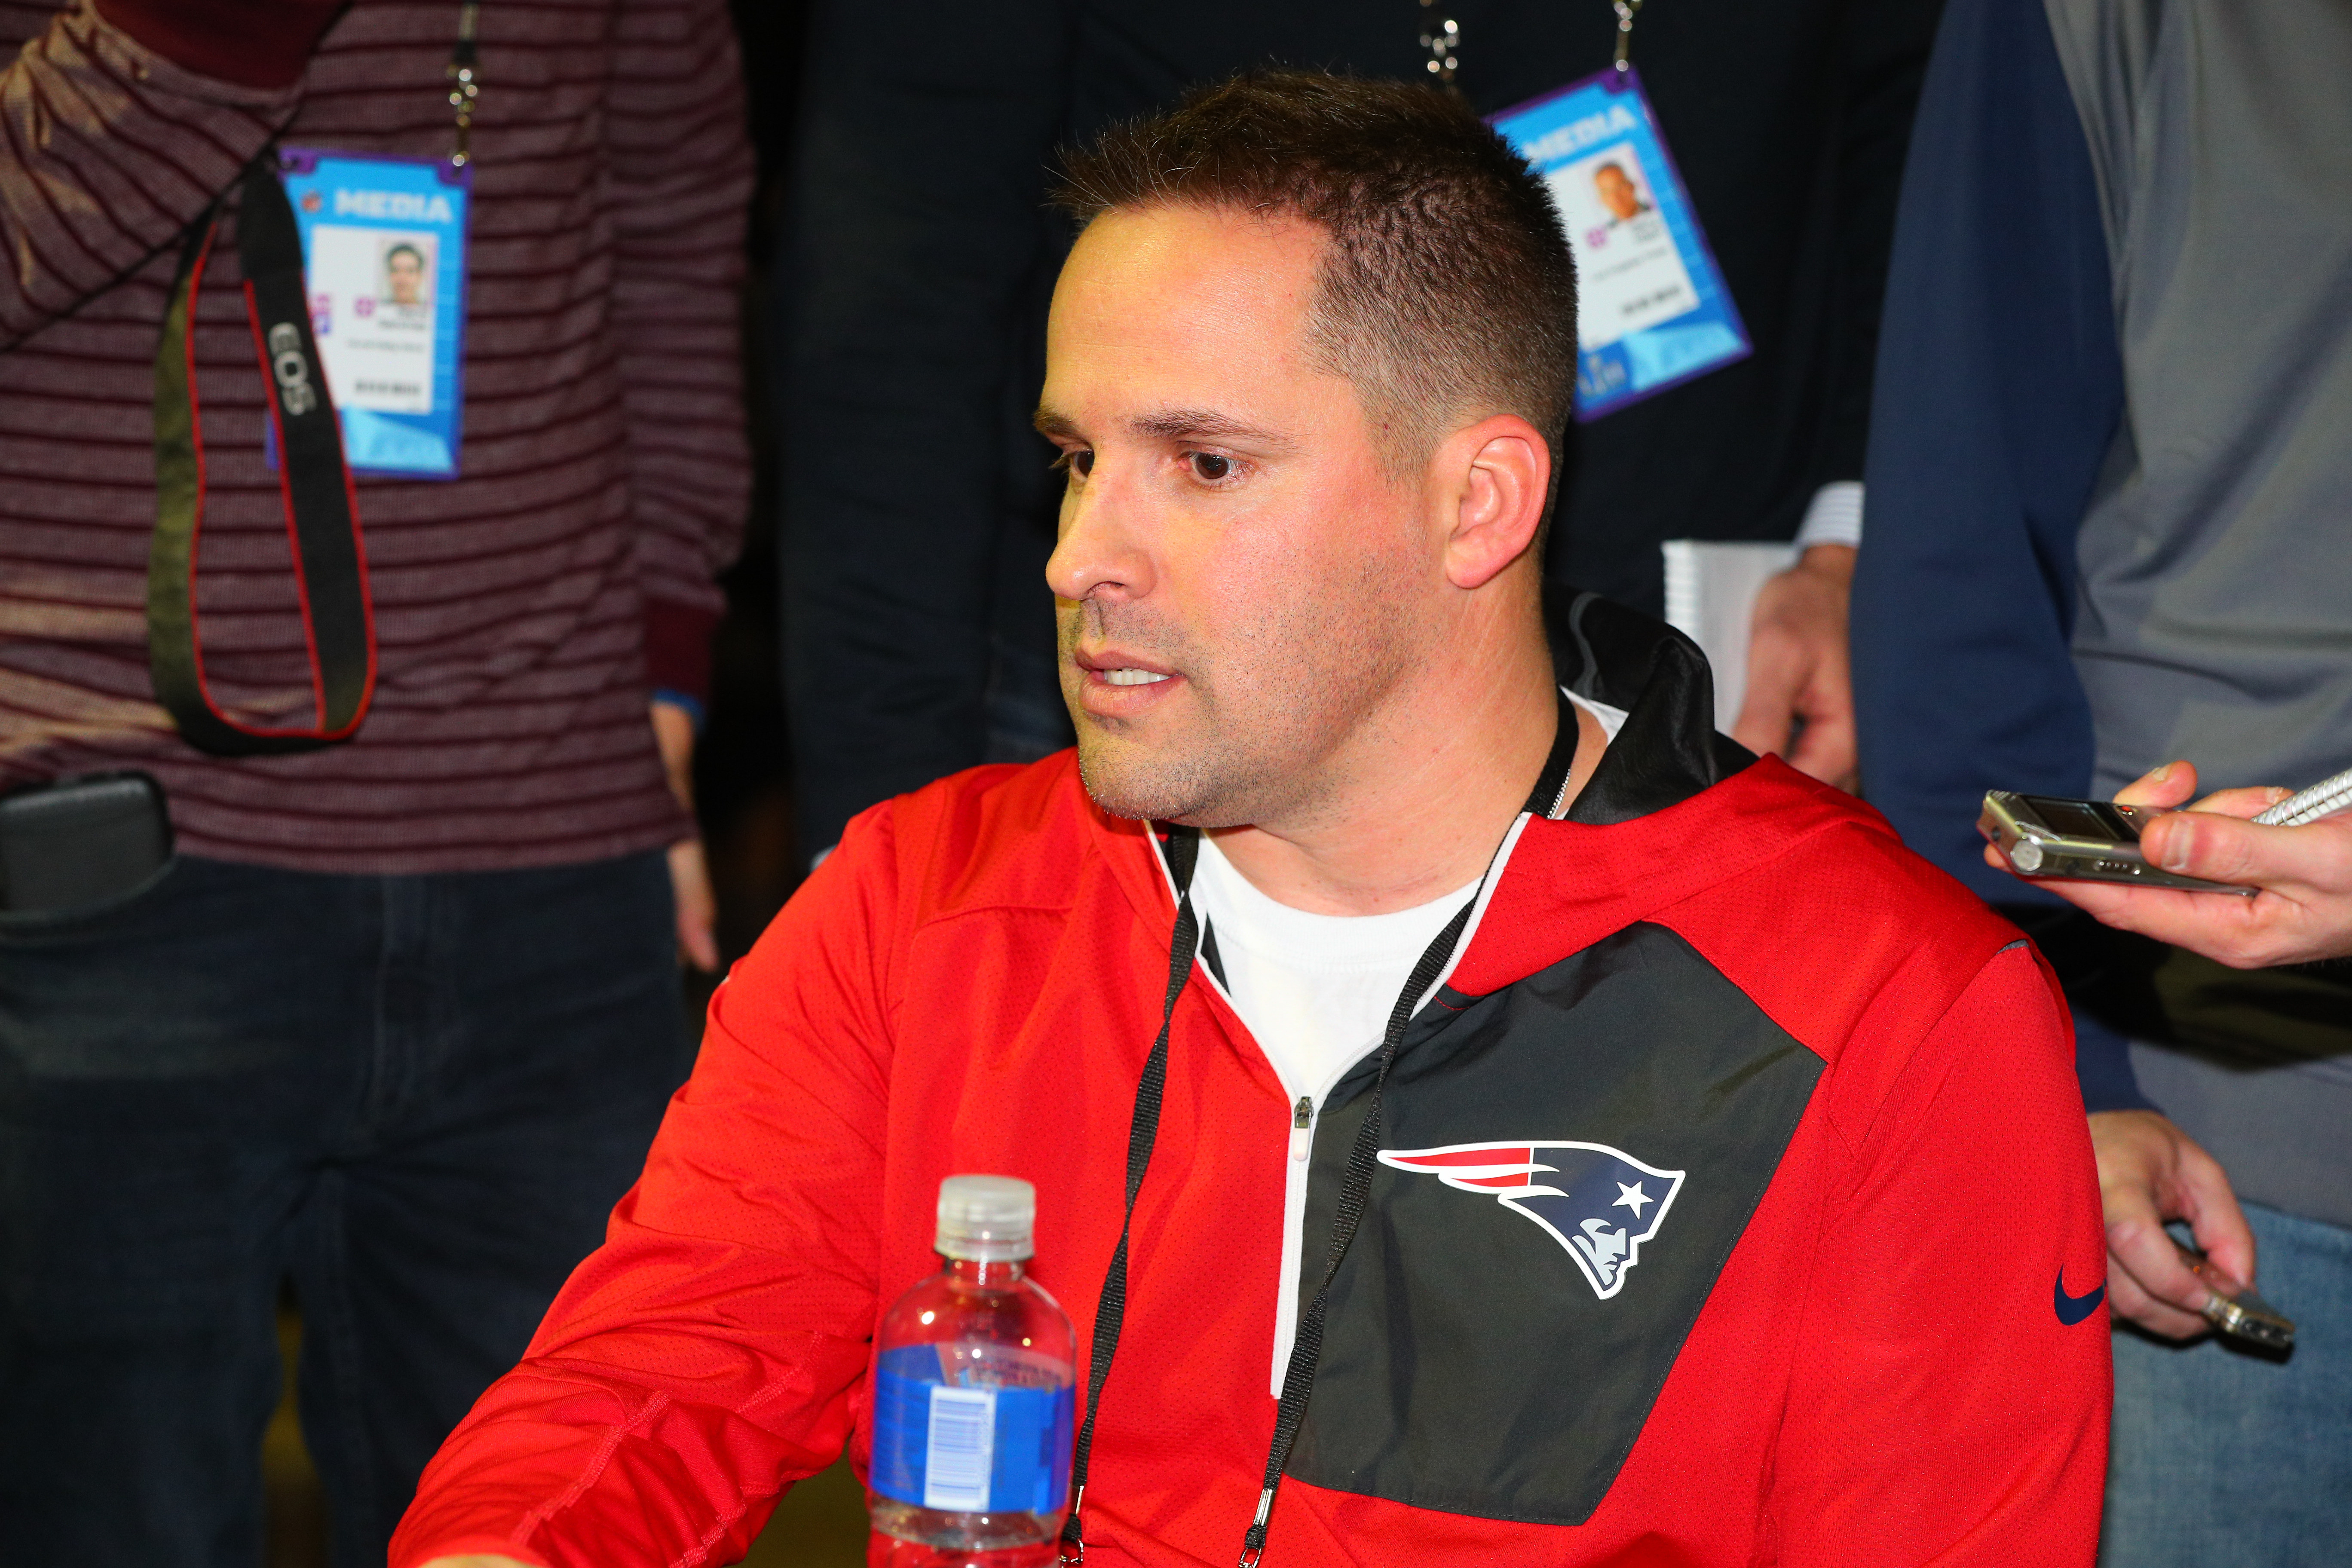 BLOOMINGTON, MN - JANUARY 31:  New England Patriots Offensive Coordinator Josh McDaniels answers questions during the New England Patriots Patriots Press Conference on January 31, 2018, at the Mall of America in Bloomington, MN.   (Photo by Rich Graessle/Icon Sportswire via Getty Images)